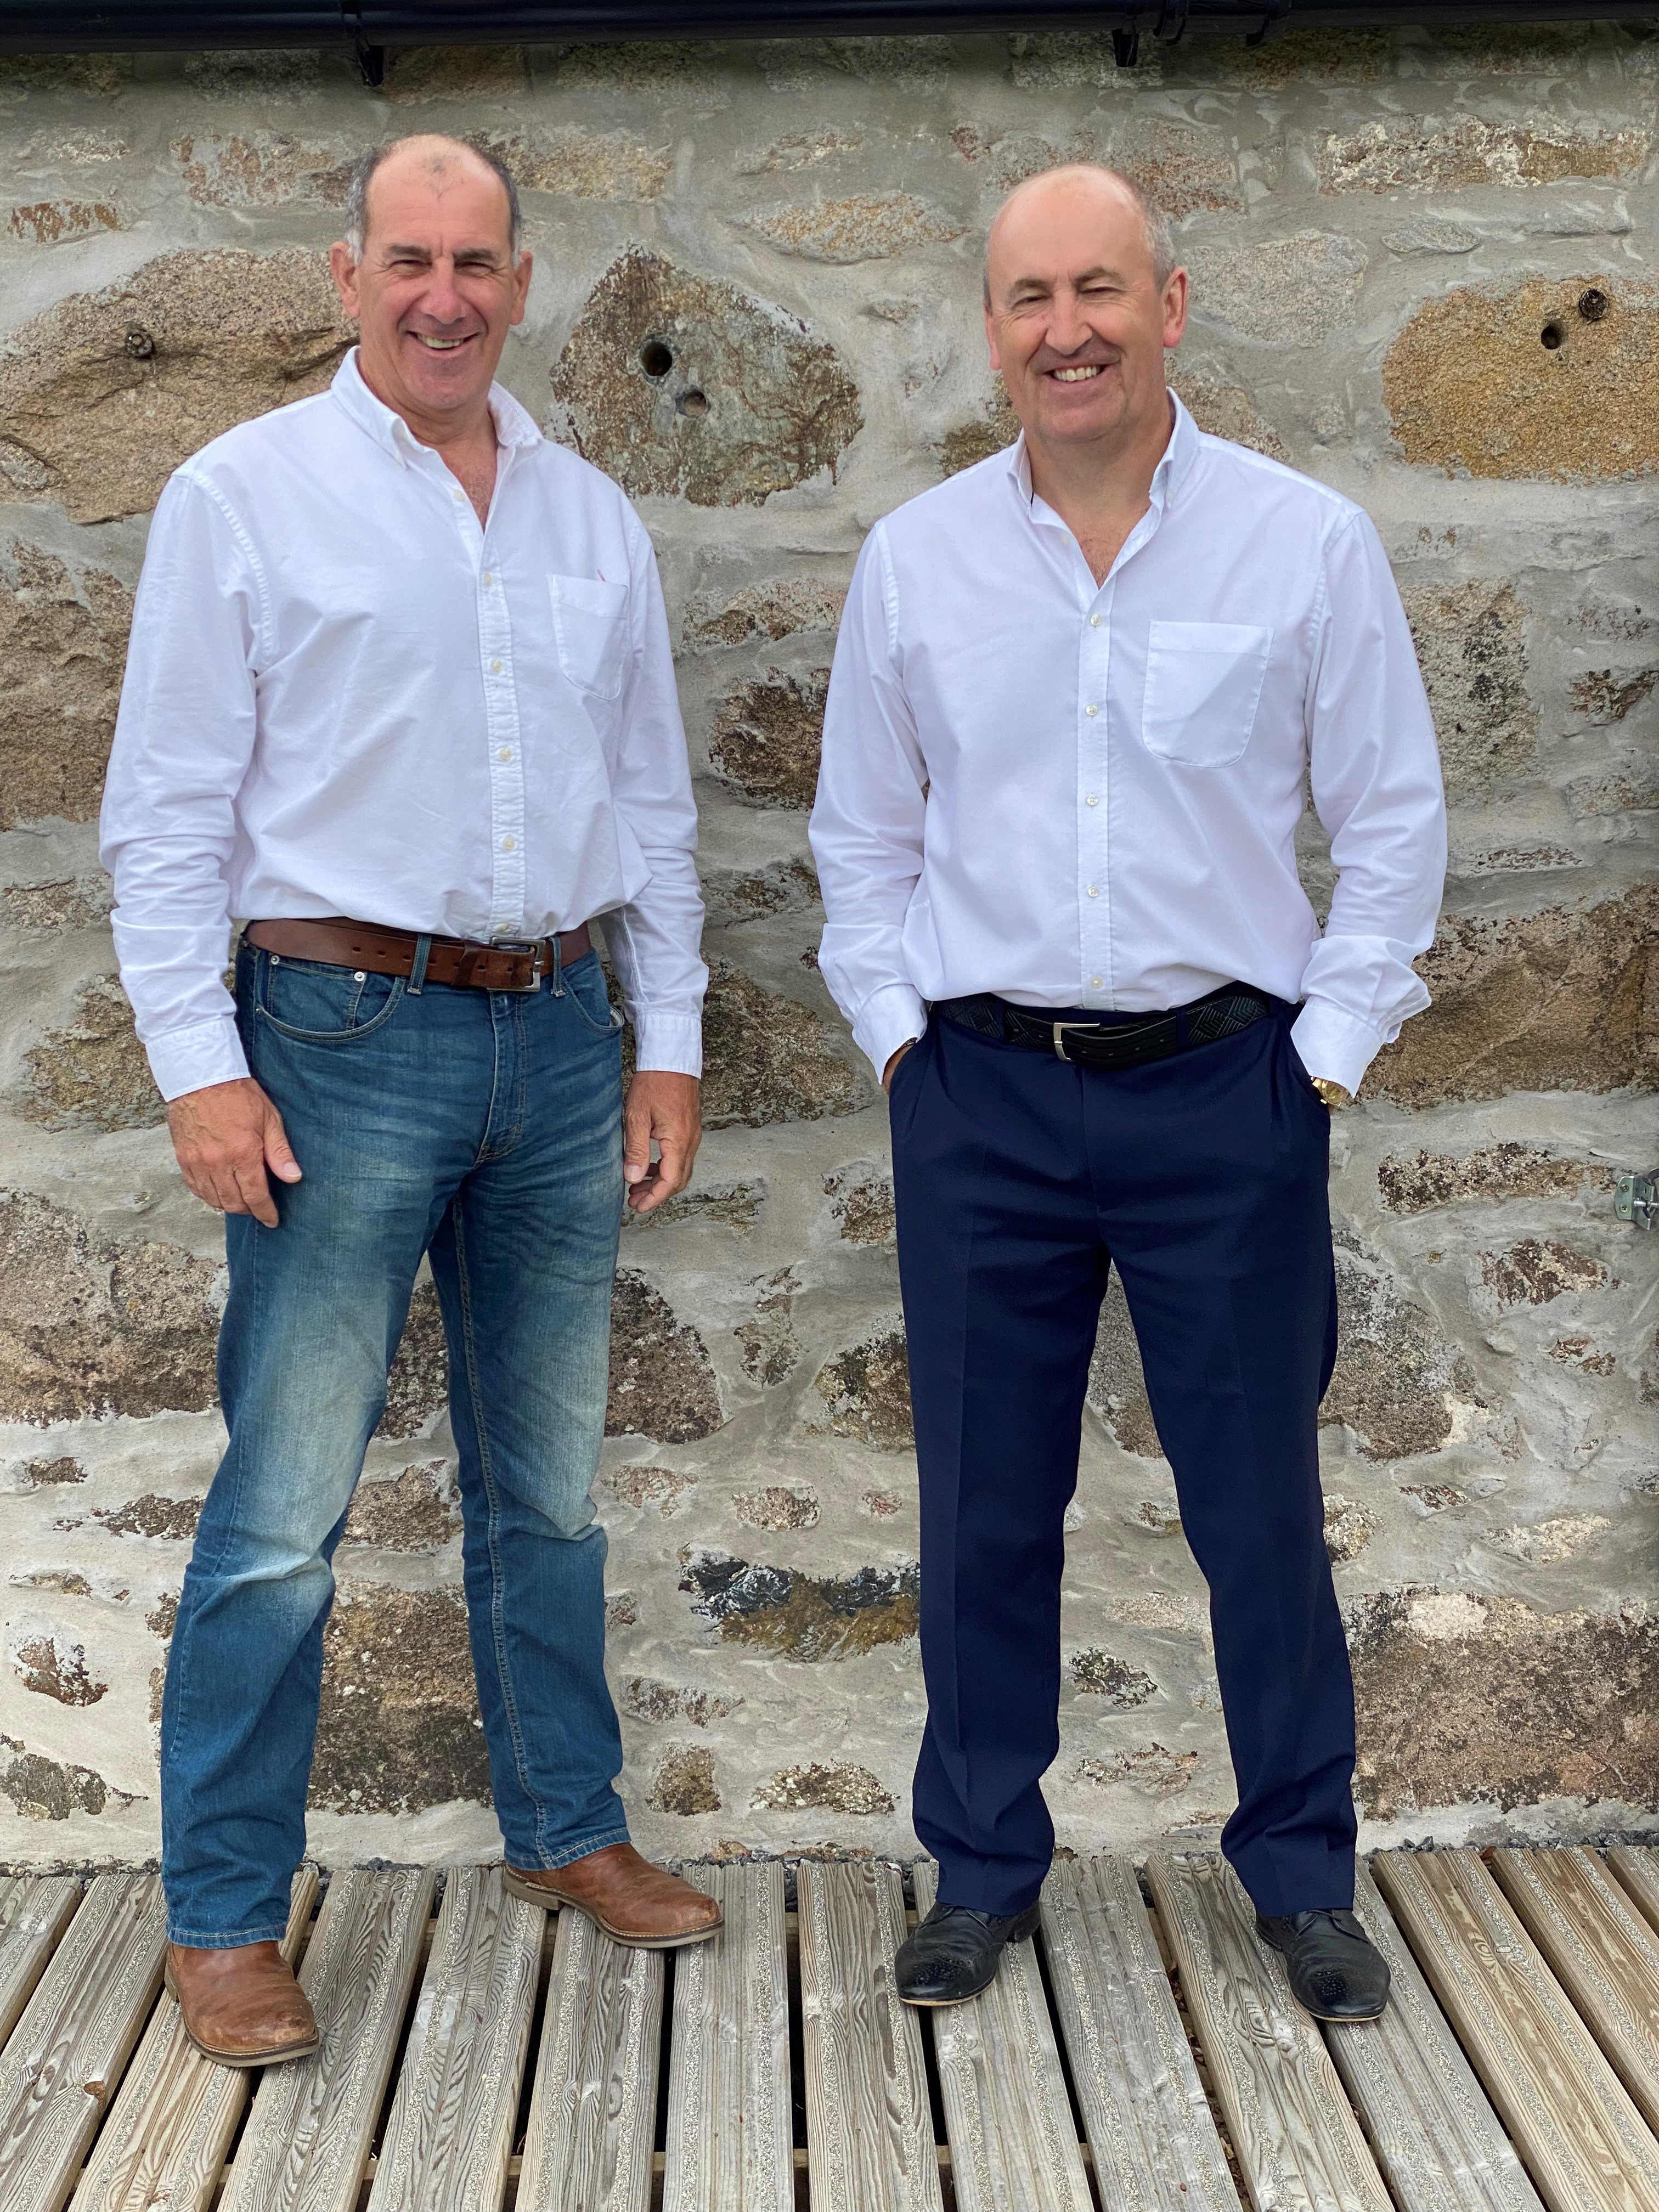 Recycl8 secures seven figure investment from private investors